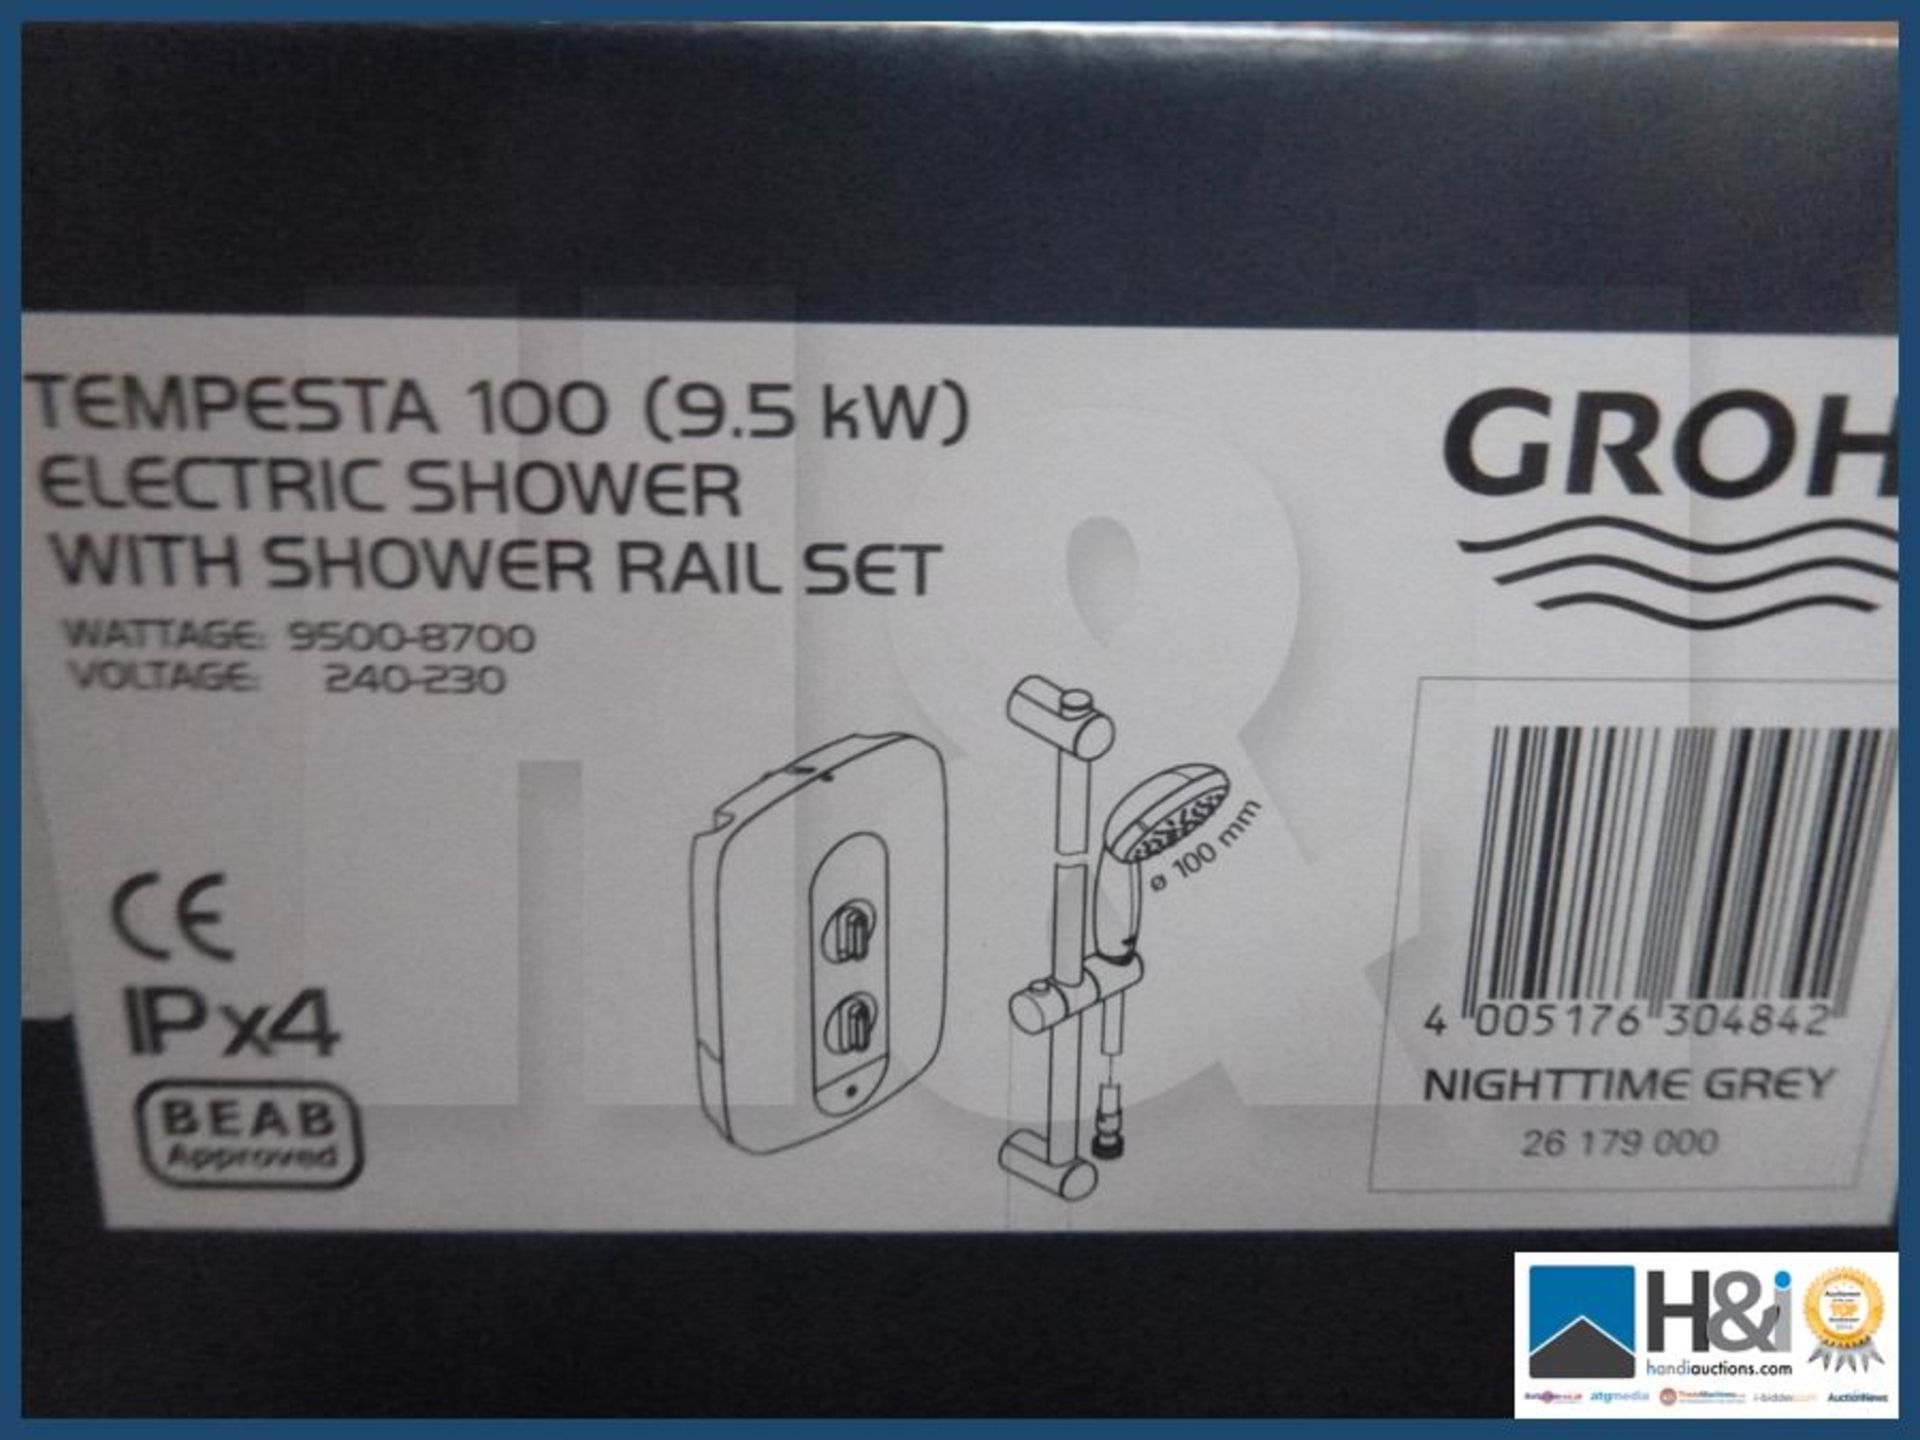 Grohe tempesta 100 (9.5kw) electric shower with shower rail kit .RRP 395 GBP. - Image 2 of 5